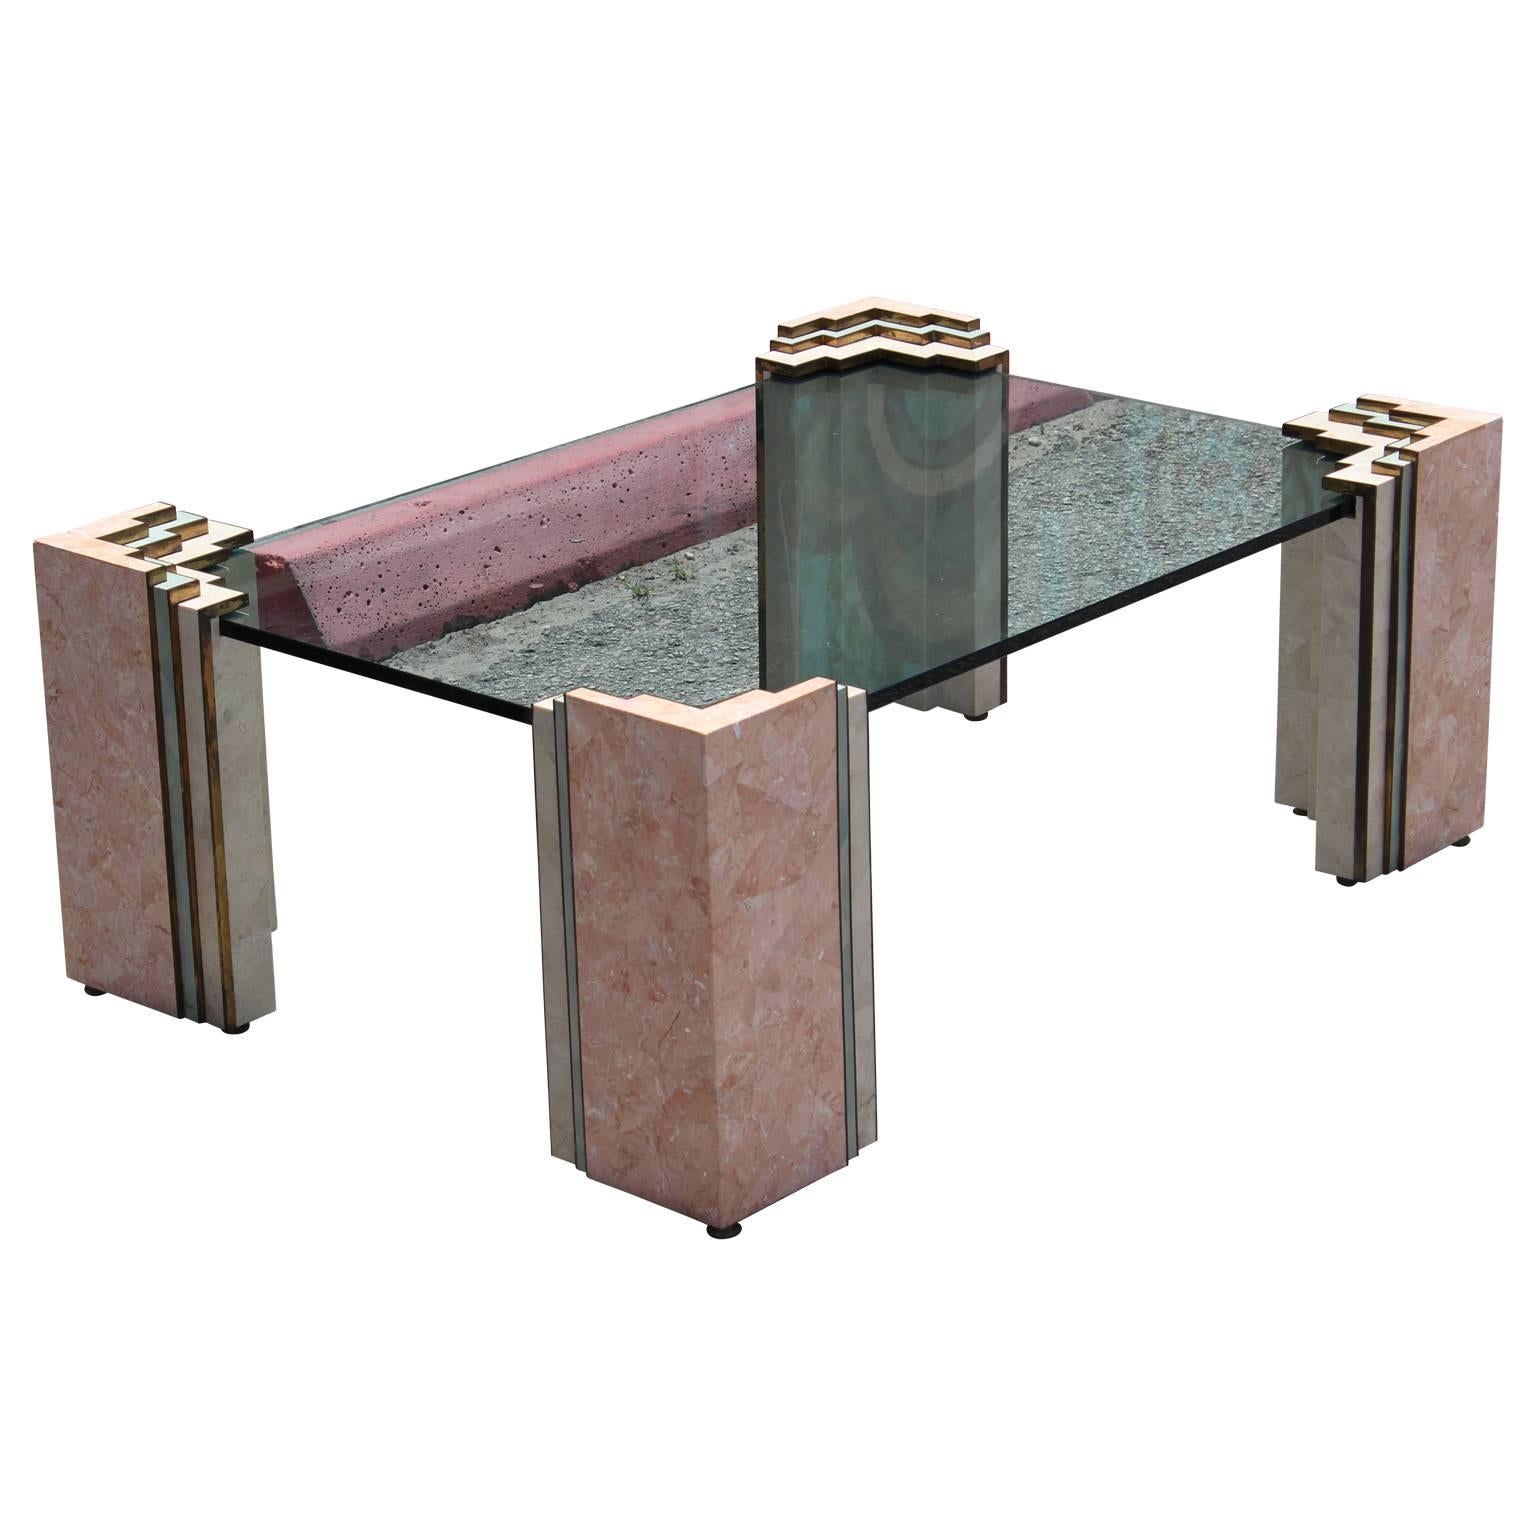 Geometric tessellated fossil marble coffee table by Maitland Smith. Table comes with a custom piece of glass that measures at 42 x 28 inches. Mid-Century Modern coffee table in sky scraper design and geometric patterns with brass detail.